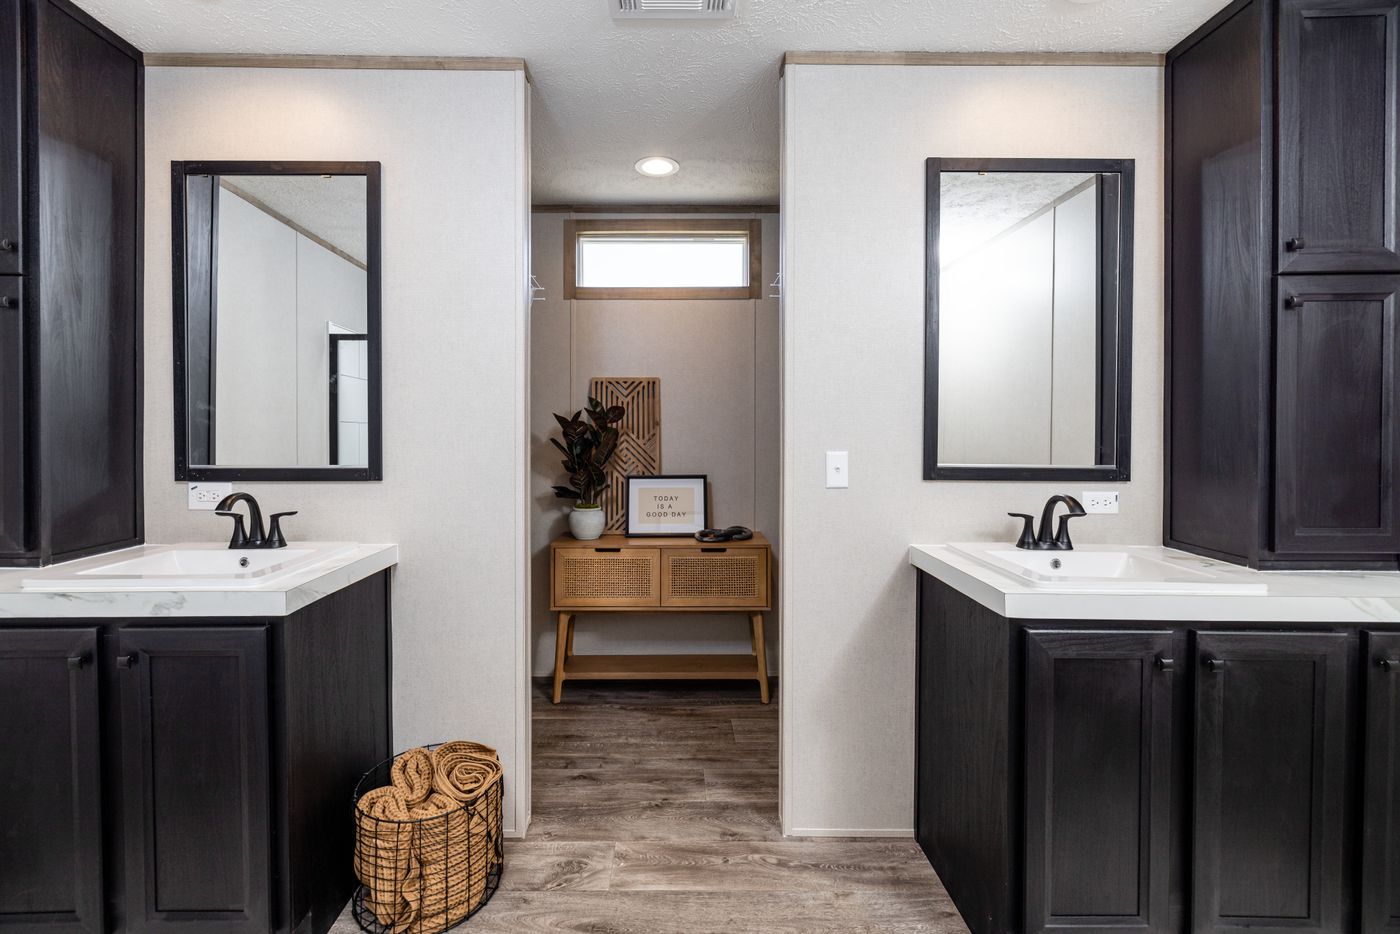 The STERLING ANNIVERSARY Primary Bathroom. This Manufactured Mobile Home features 3 bedrooms and 2 baths.